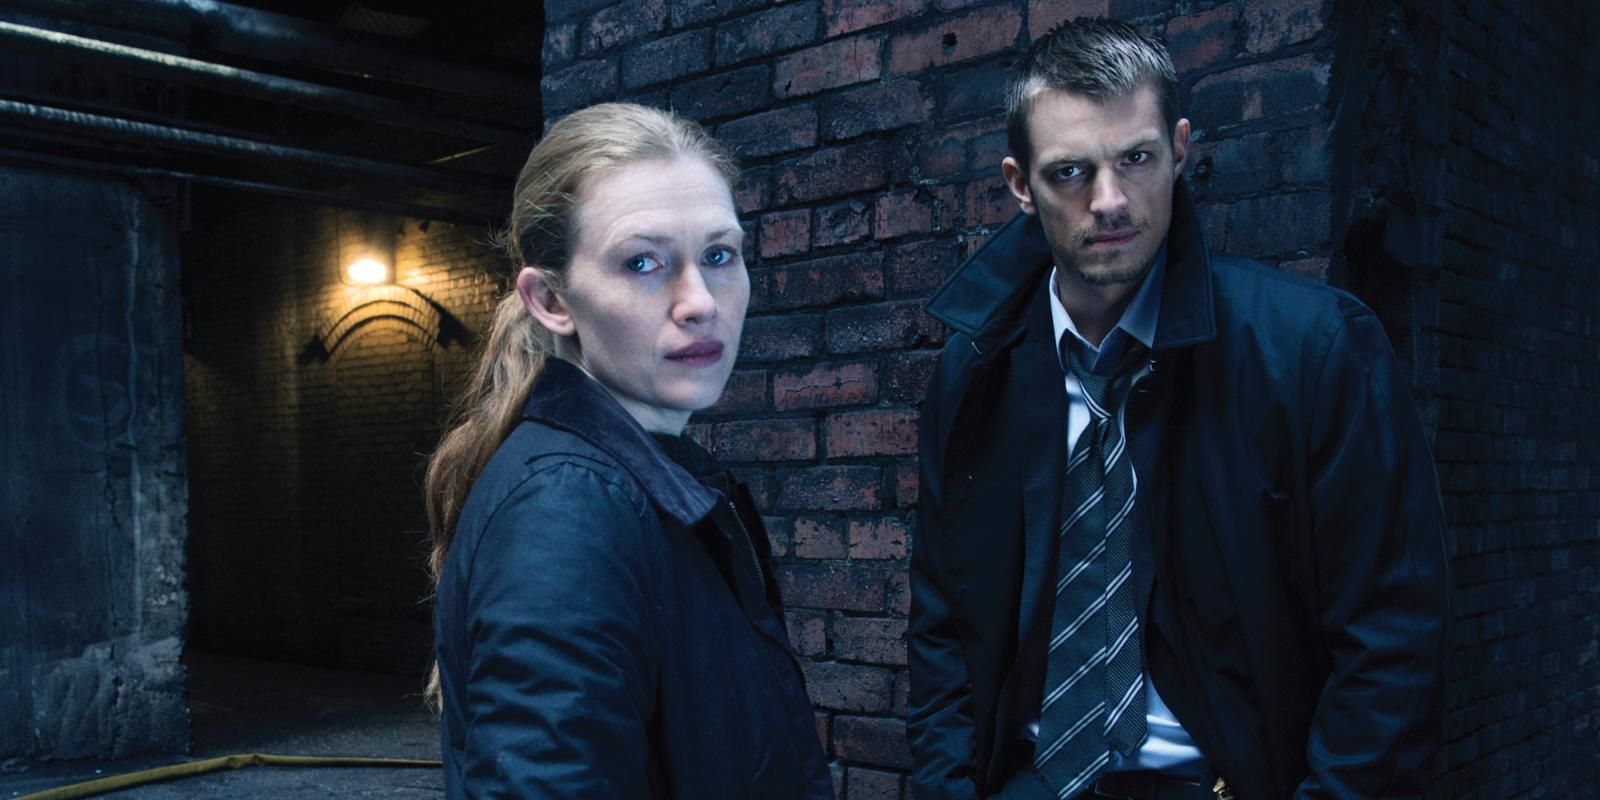 Sarah Linden as Mireille and Stephen Holder as Joel in The Killing